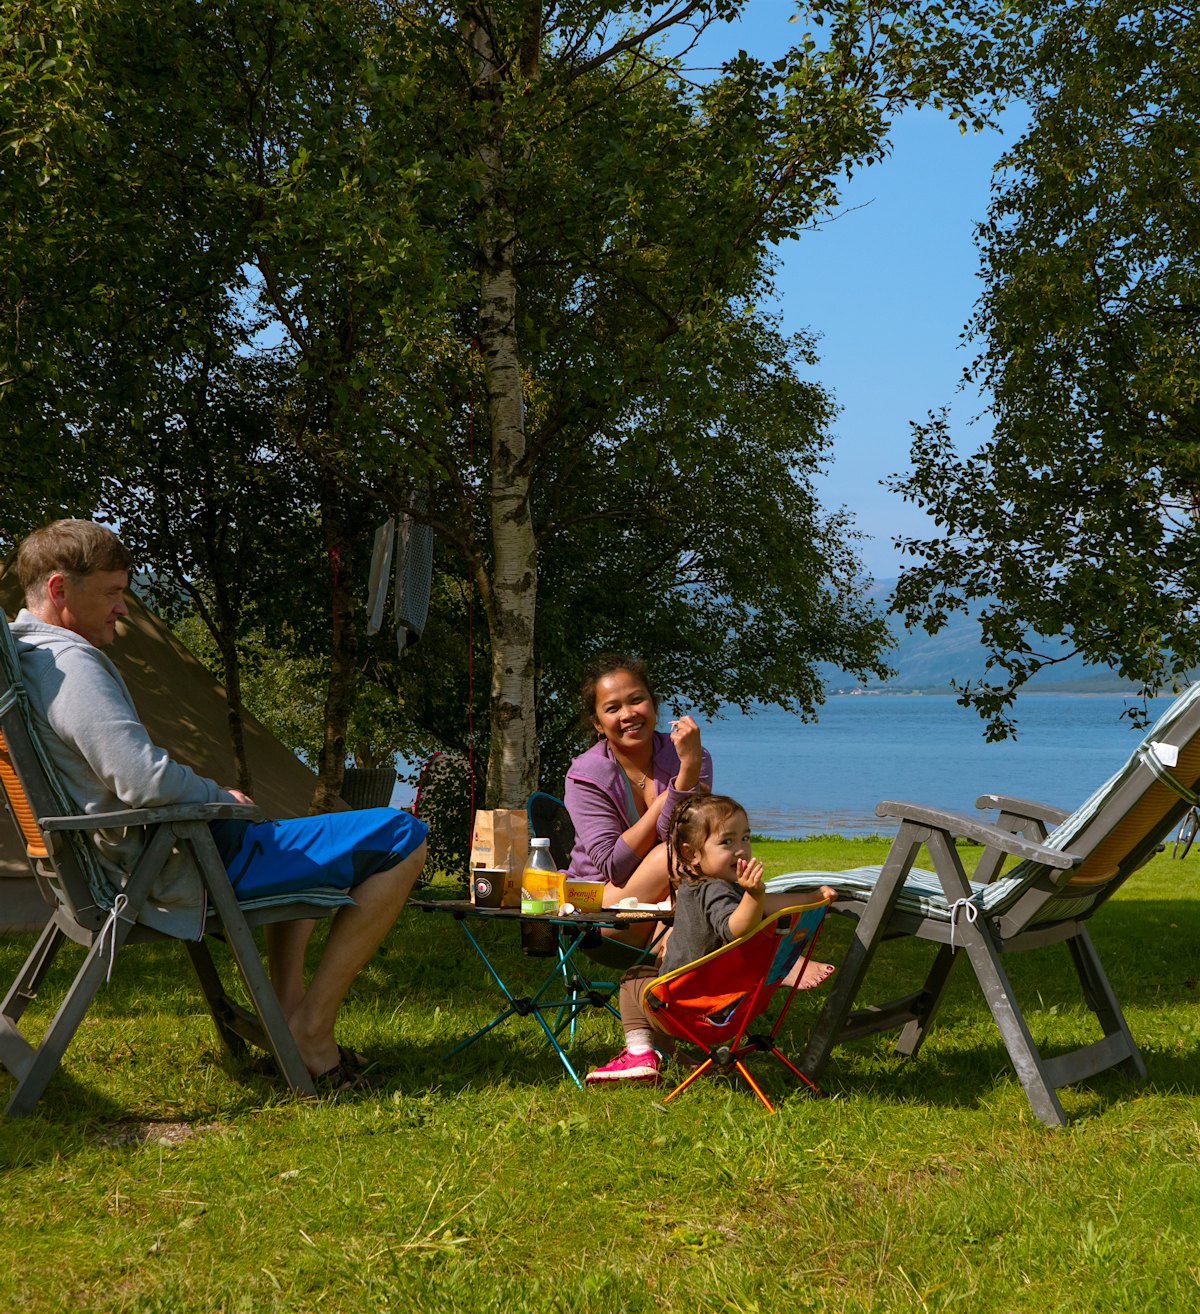 Family enjoying breakfast in the nice weather at Nesna. Photo